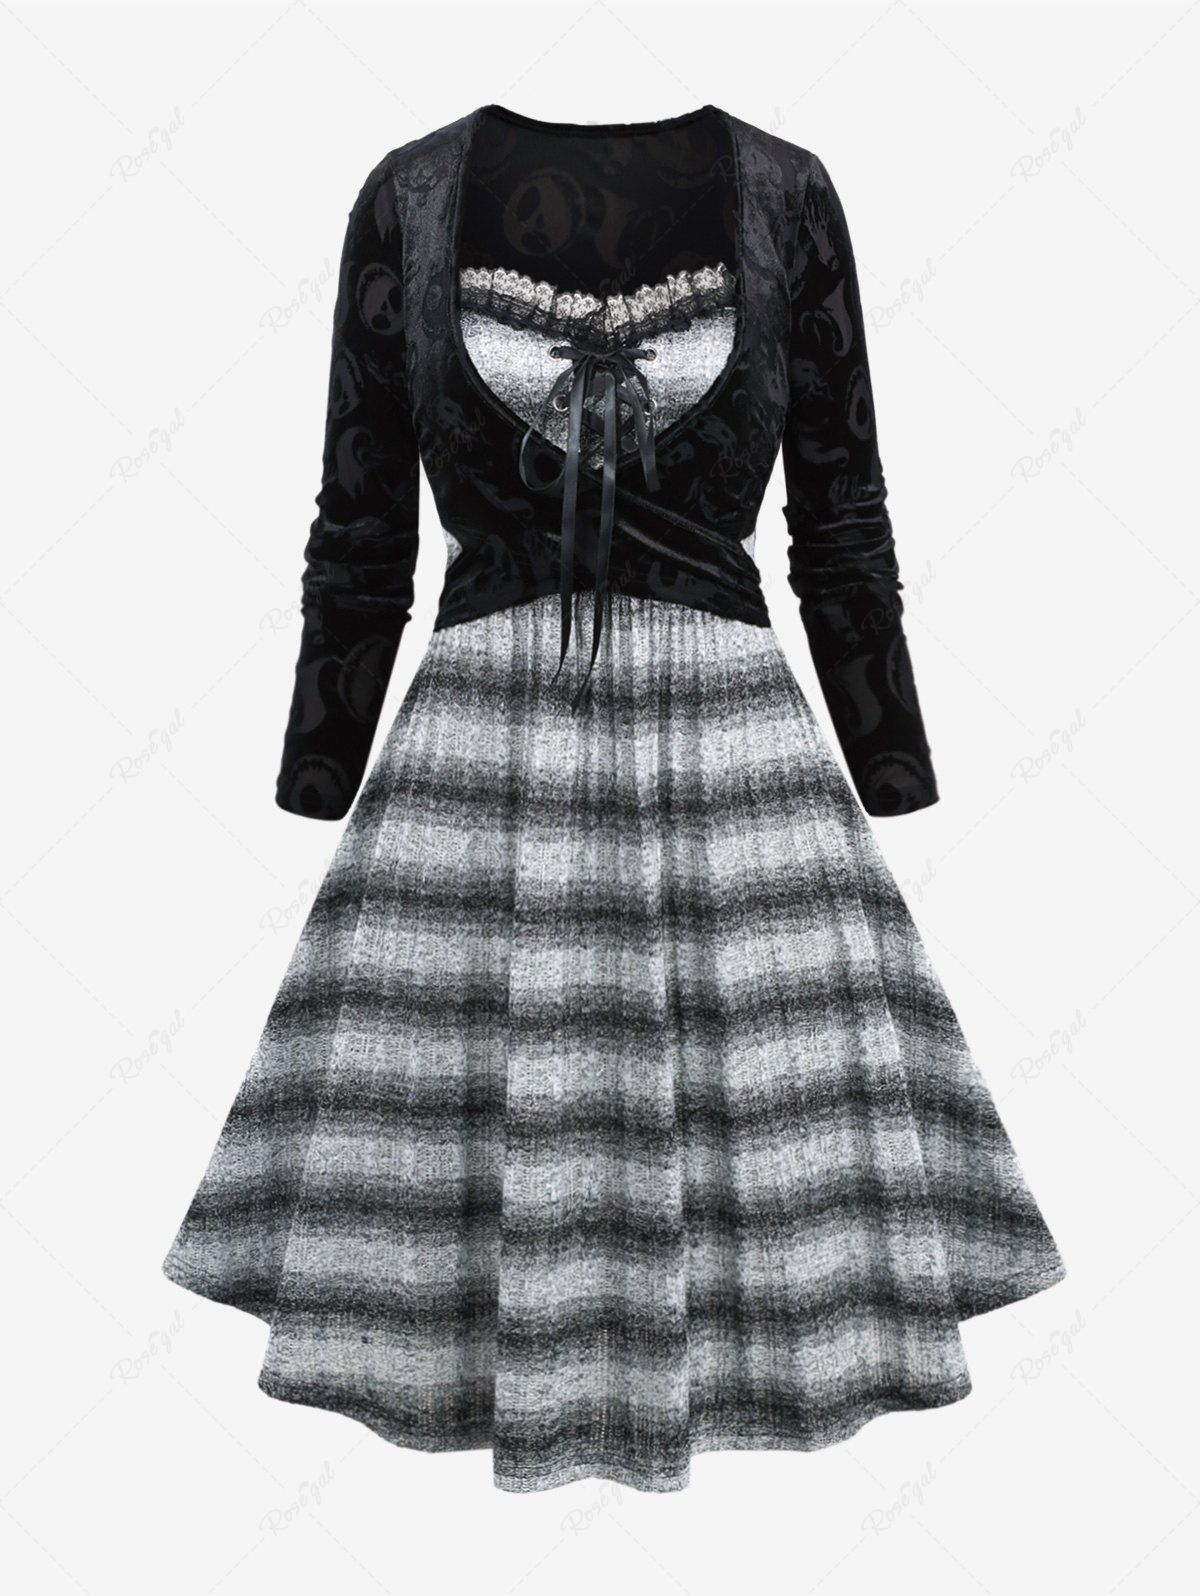 Chic Plus Size Skull Ghost Flocking Crossover Lace-up Ruffle Lace Striped Knitted Halloween 2 in 1 Dress  